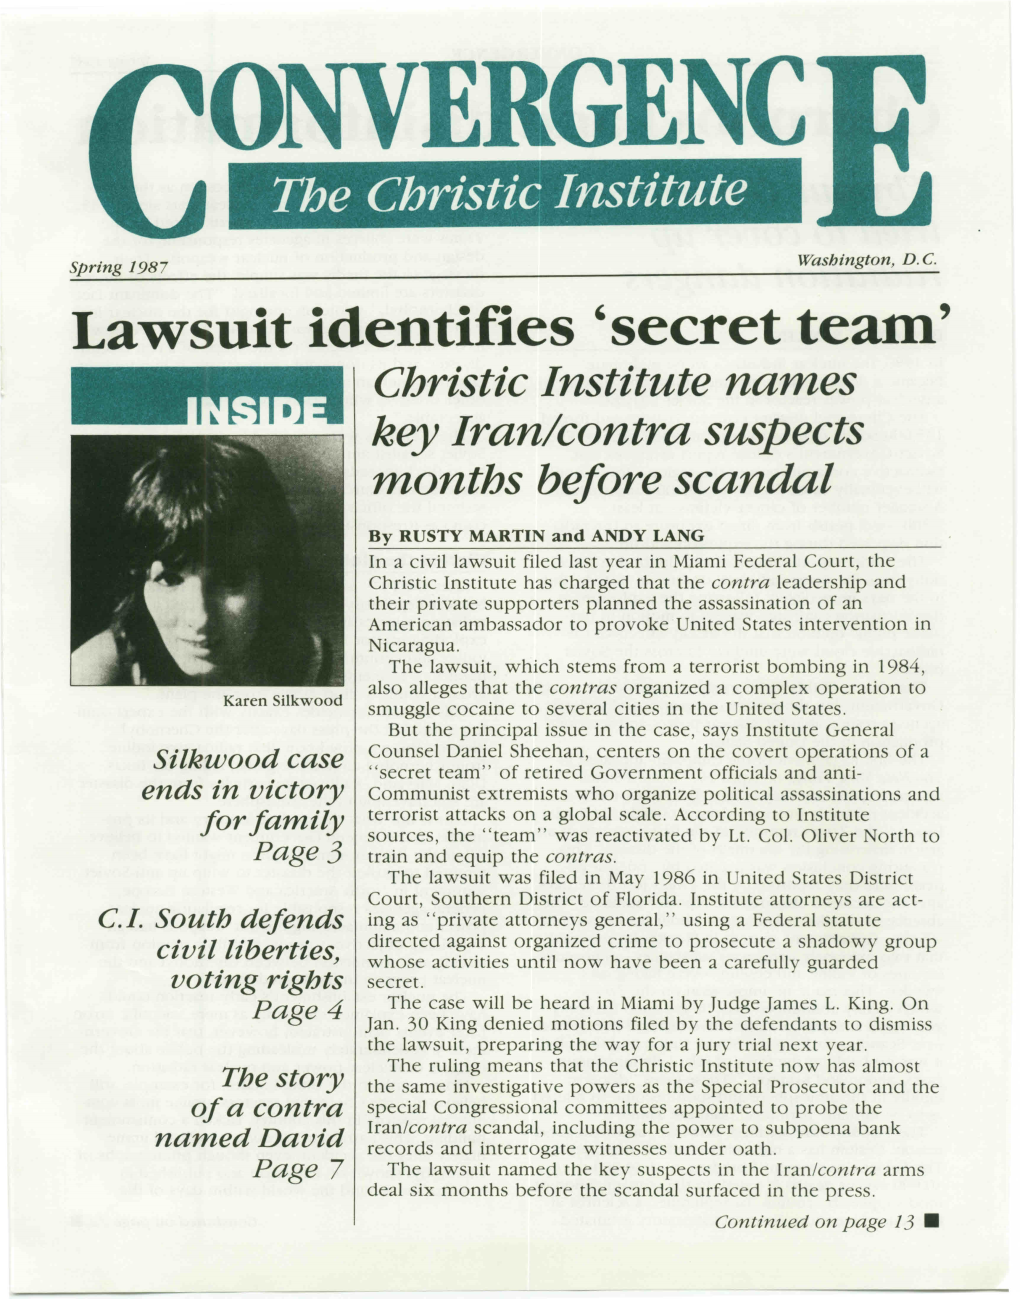 Lawsuit Identifies 'Secret Team' Christic Institute Names 11111111 1191 Key Iran/Contra Suspects Months Before Scandal